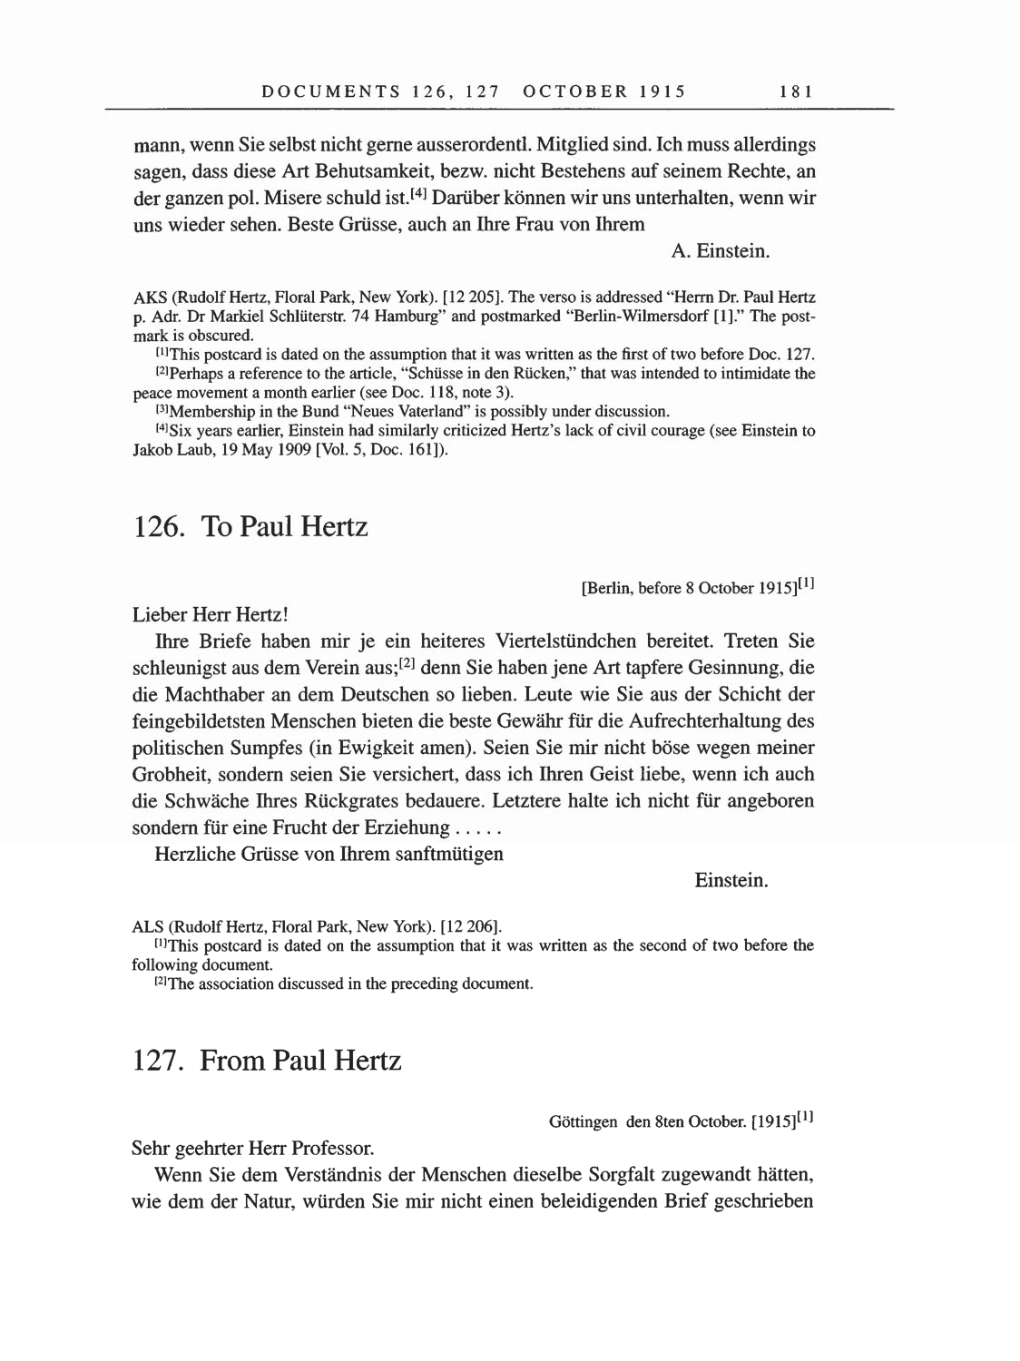 Volume 8, Part A: The Berlin Years: Correspondence 1914-1917 page 181